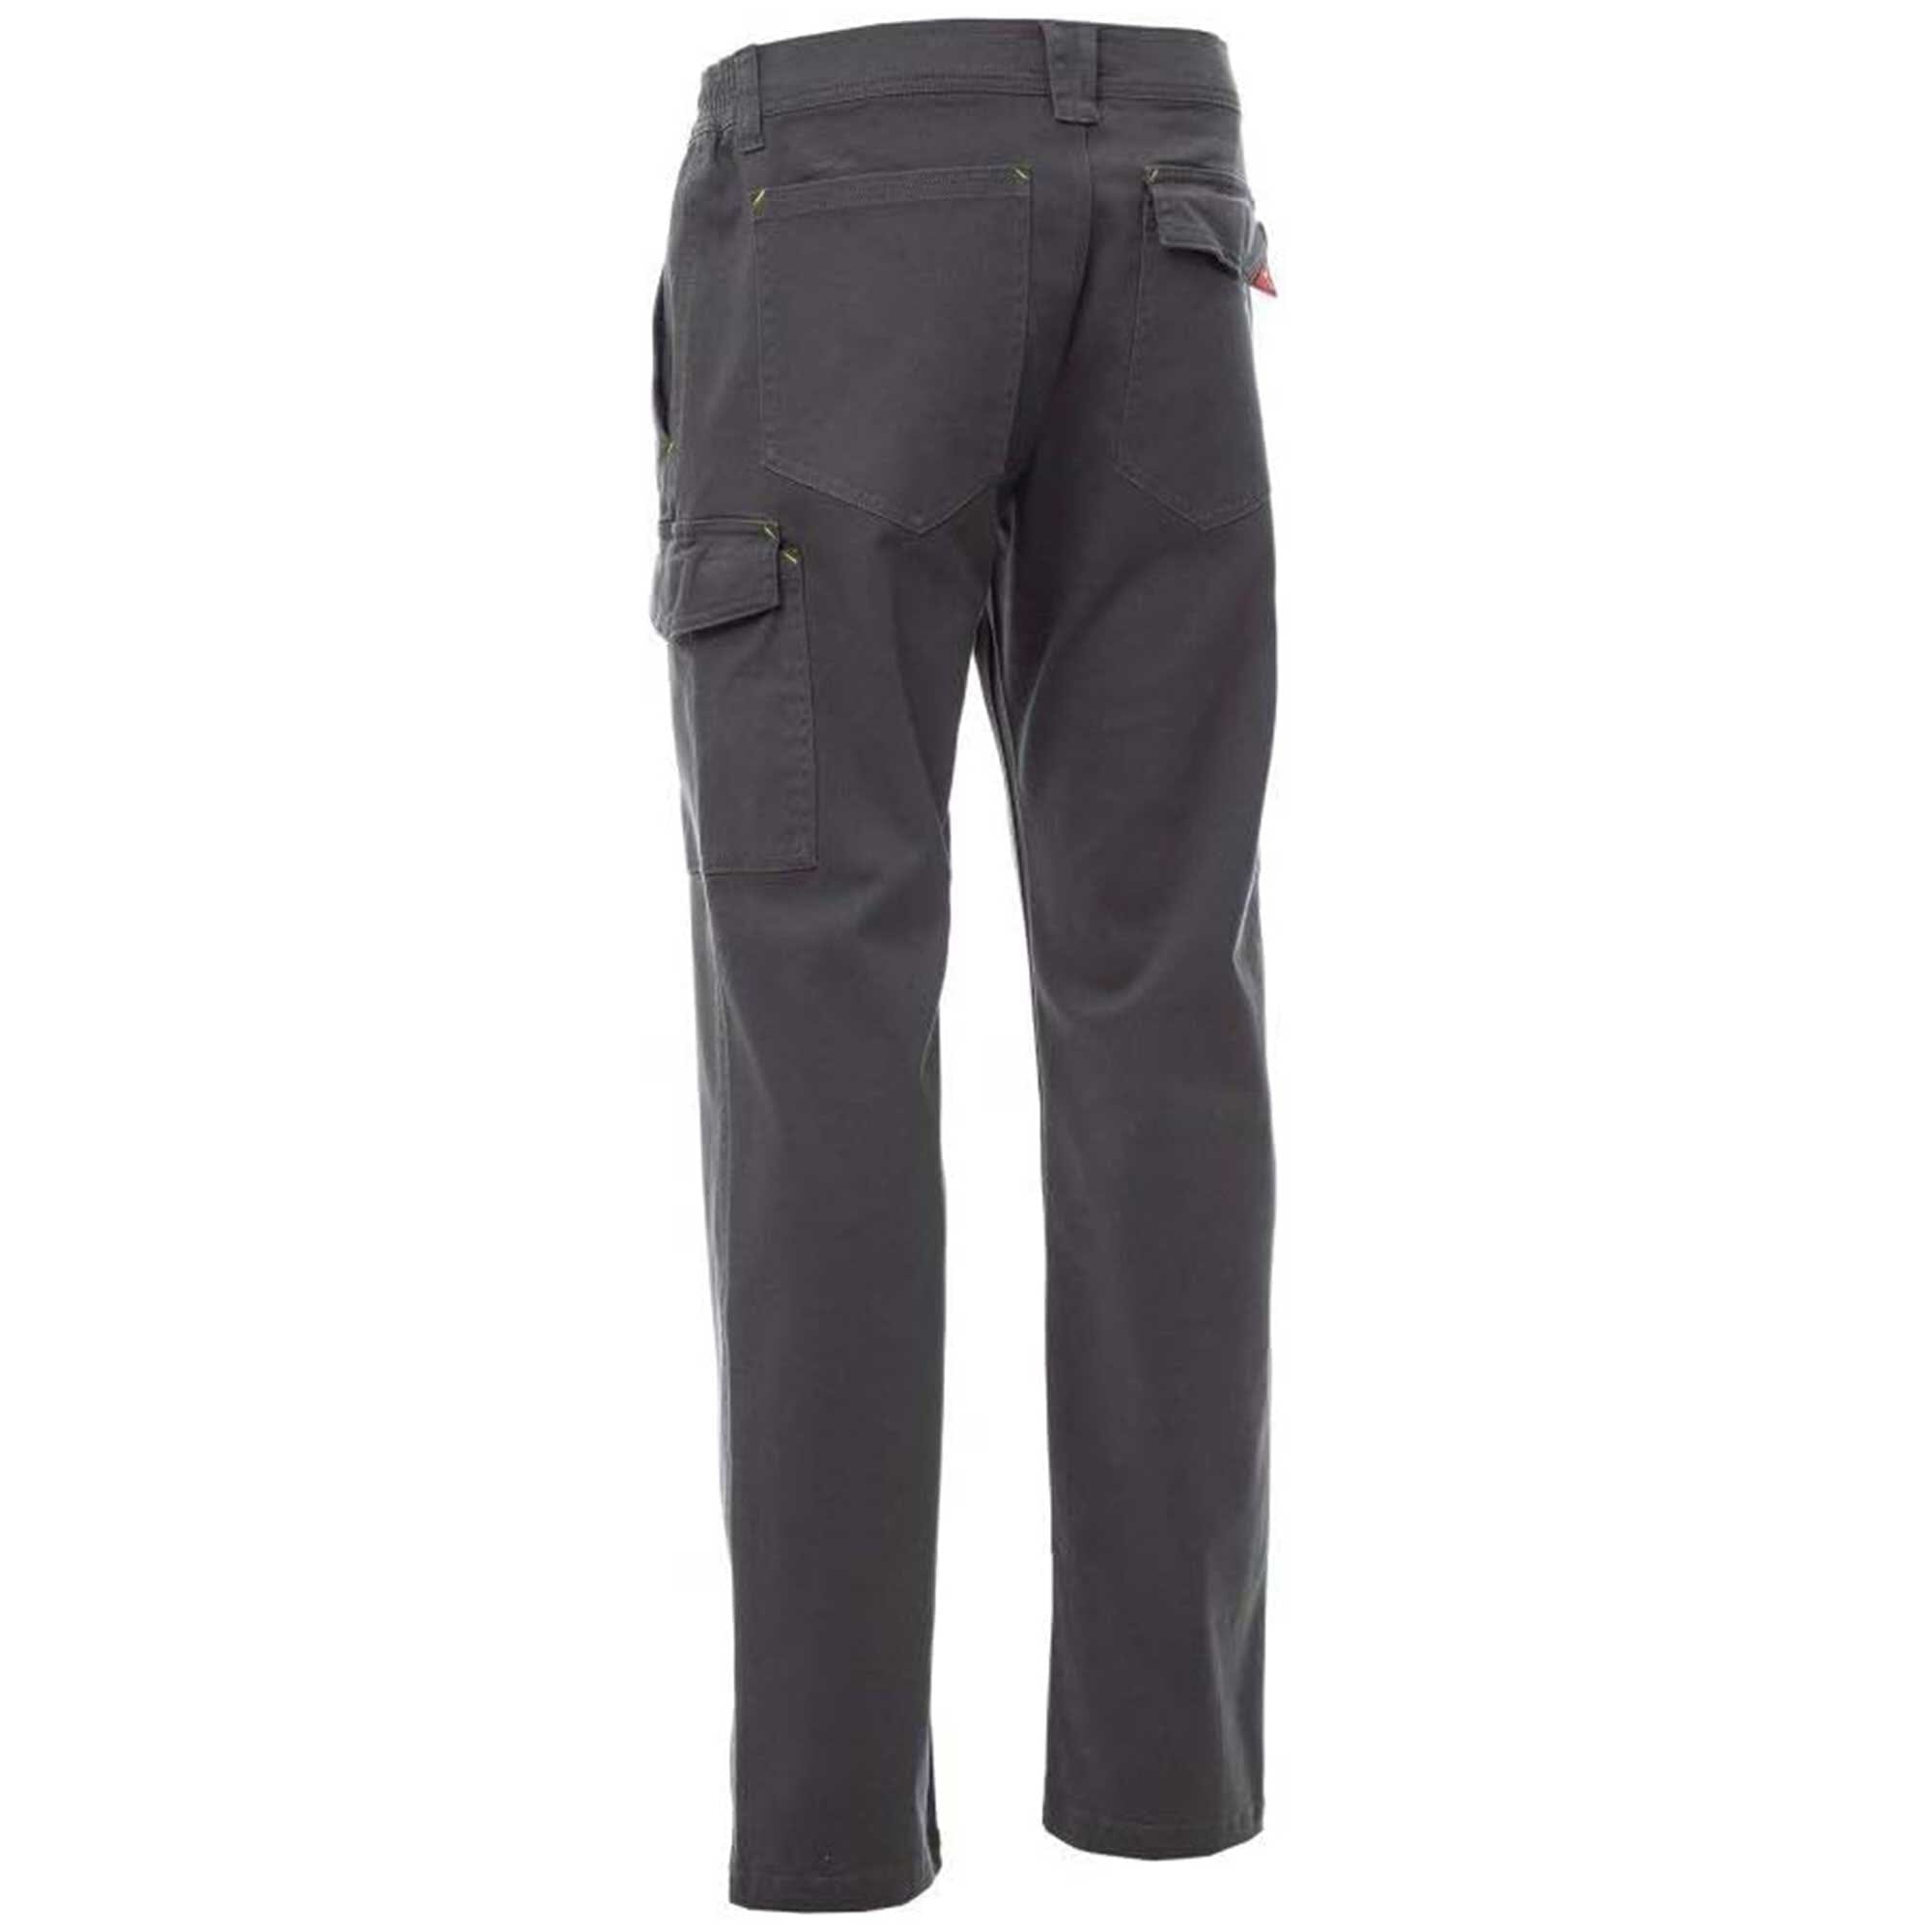 Buy Cargo Trousers For Men Online at Best Price – House of Stori